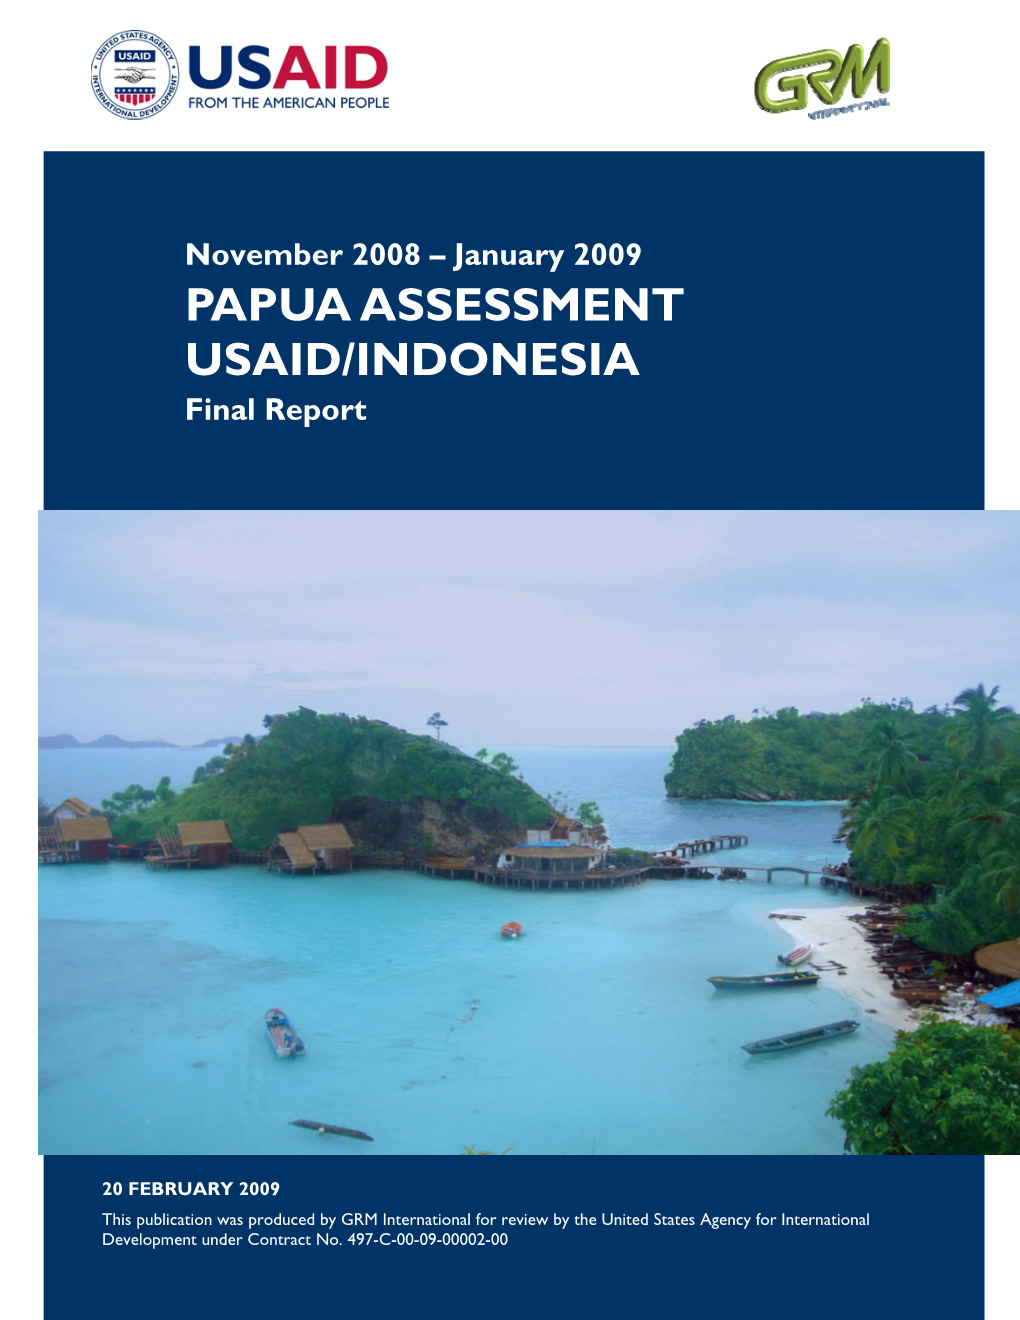 PAPUA ASSESSMENT USAID/INDONESIA Final Report